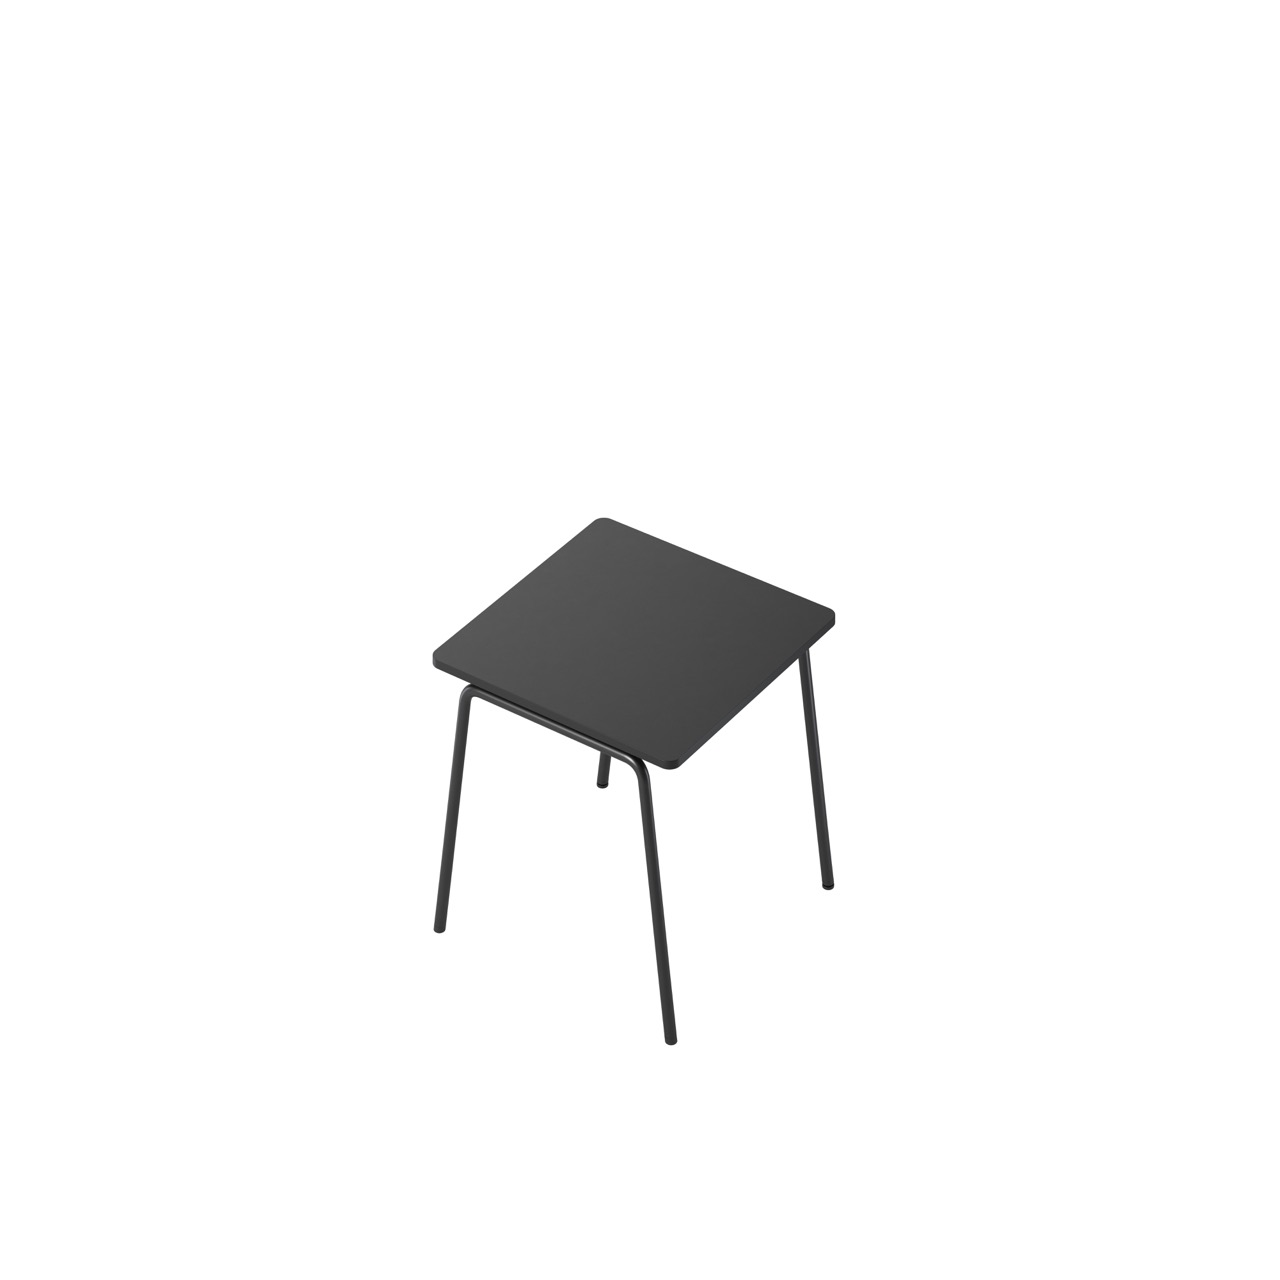 OCEE&FOUR - Tables - FourReal 74 - 80 x 80 - Angled - Packshot Image 3 Large